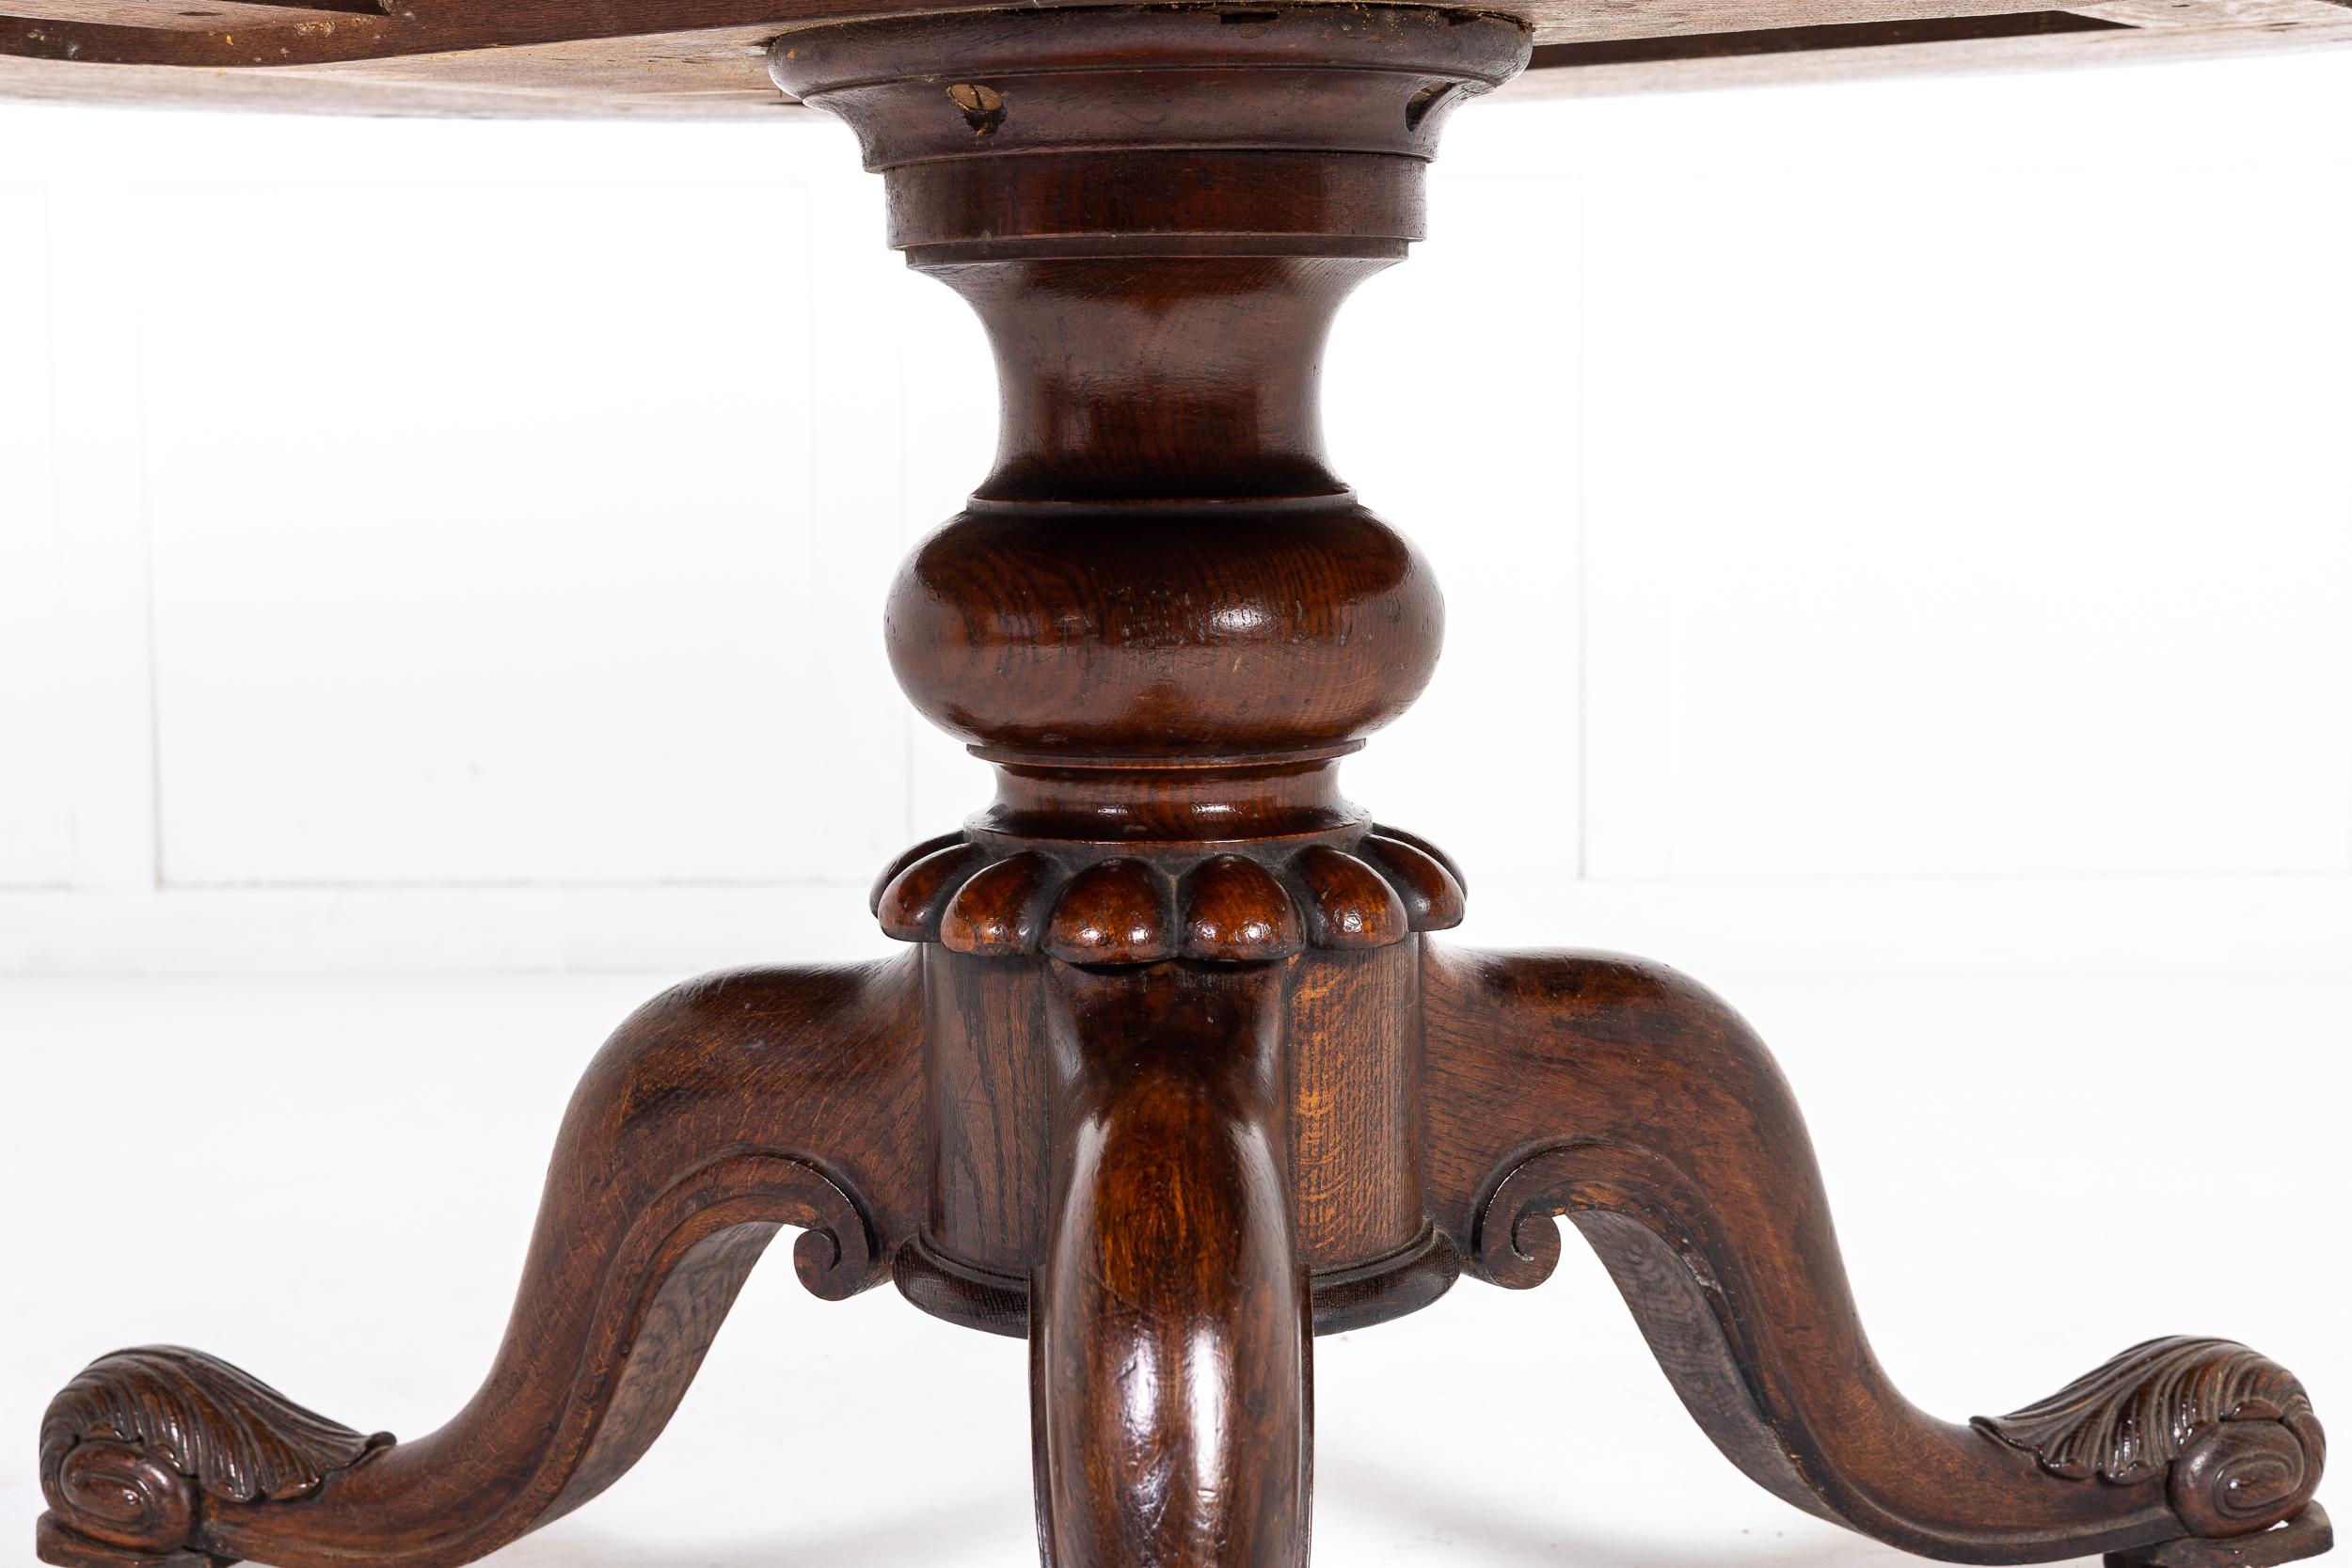 A very fine late George IV/early William IV oak rent or drum table with the original finely tooled leather to the top c.1830

The table featuring four drawers and four mock drawers above a tripod base with finely carved toes and panelled sections.